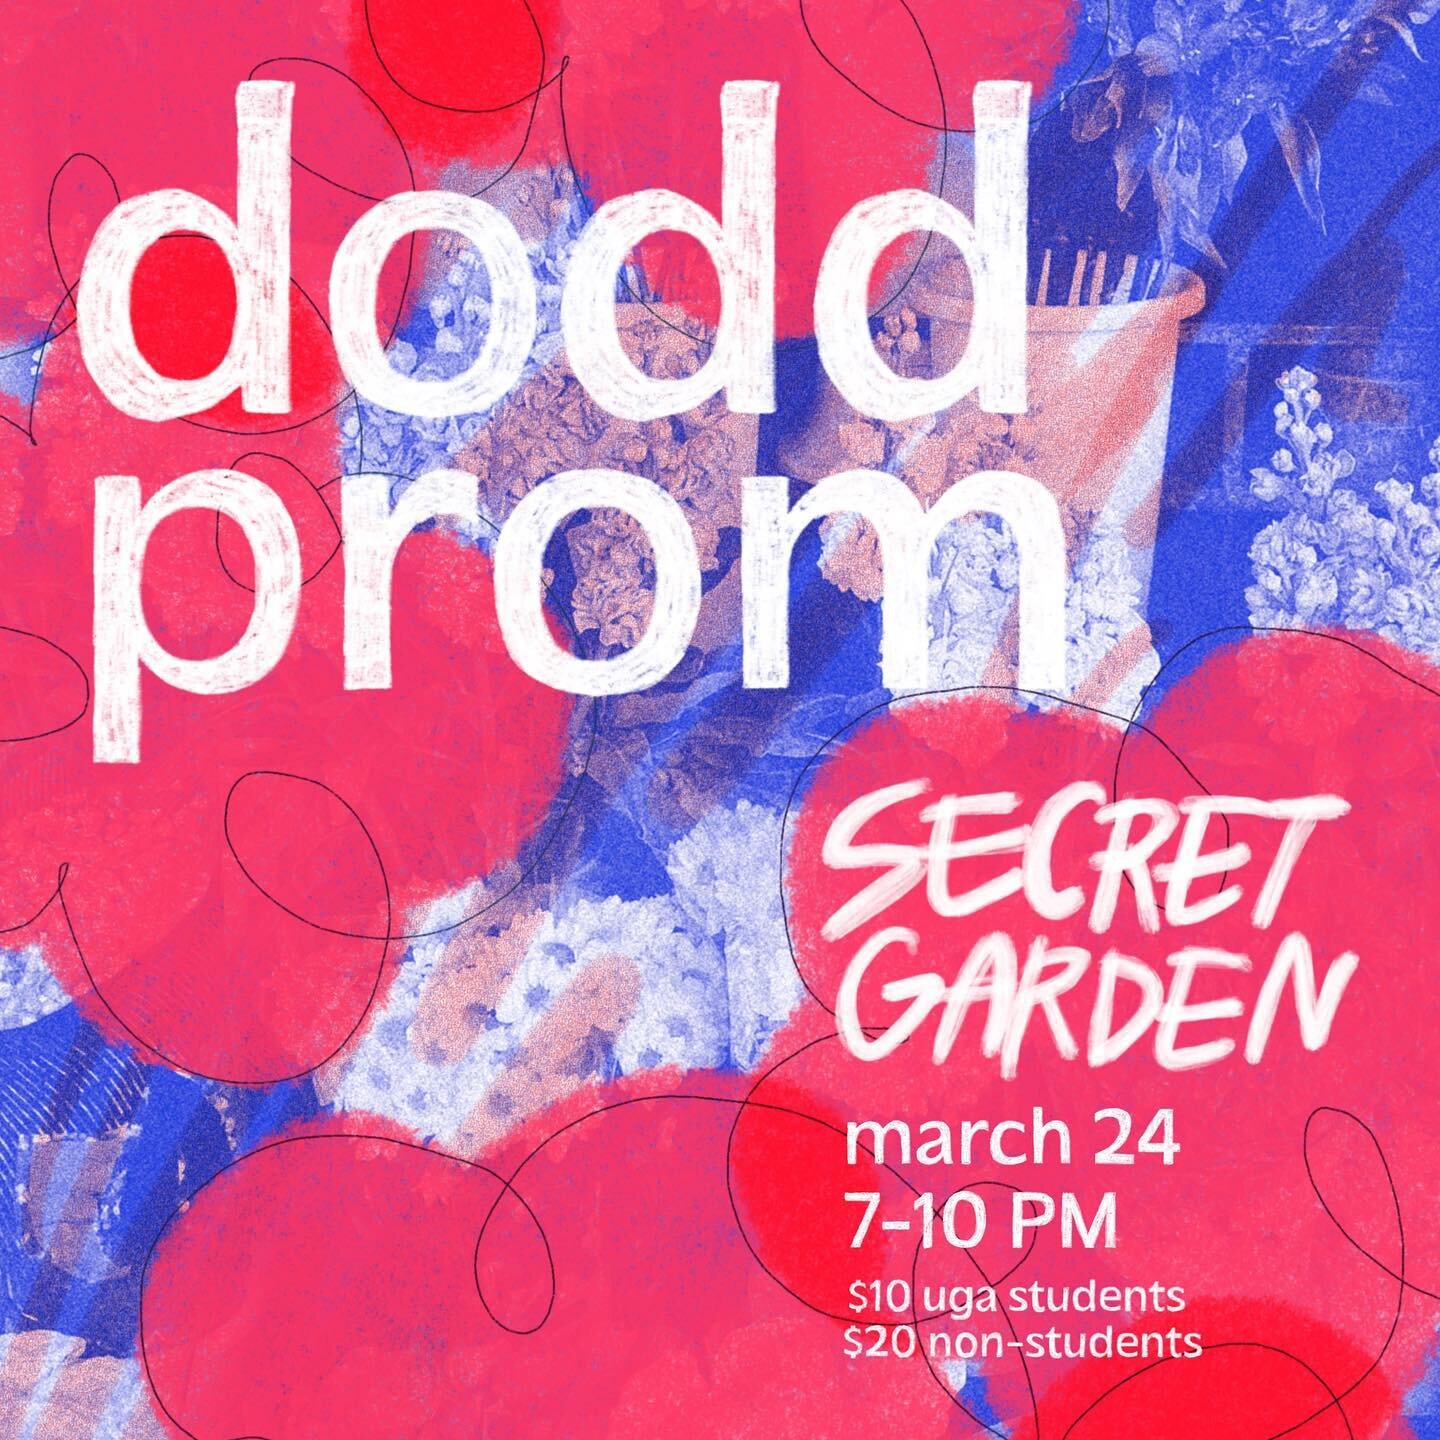 The first ever Dodd Prom is happening next Friday, March 24th from 7-10 PM!  We are so excited to host this event - come dressed in formal attire and dance the night away with friends and the mocktail bar! Buy your tickets at the door with cash or ve